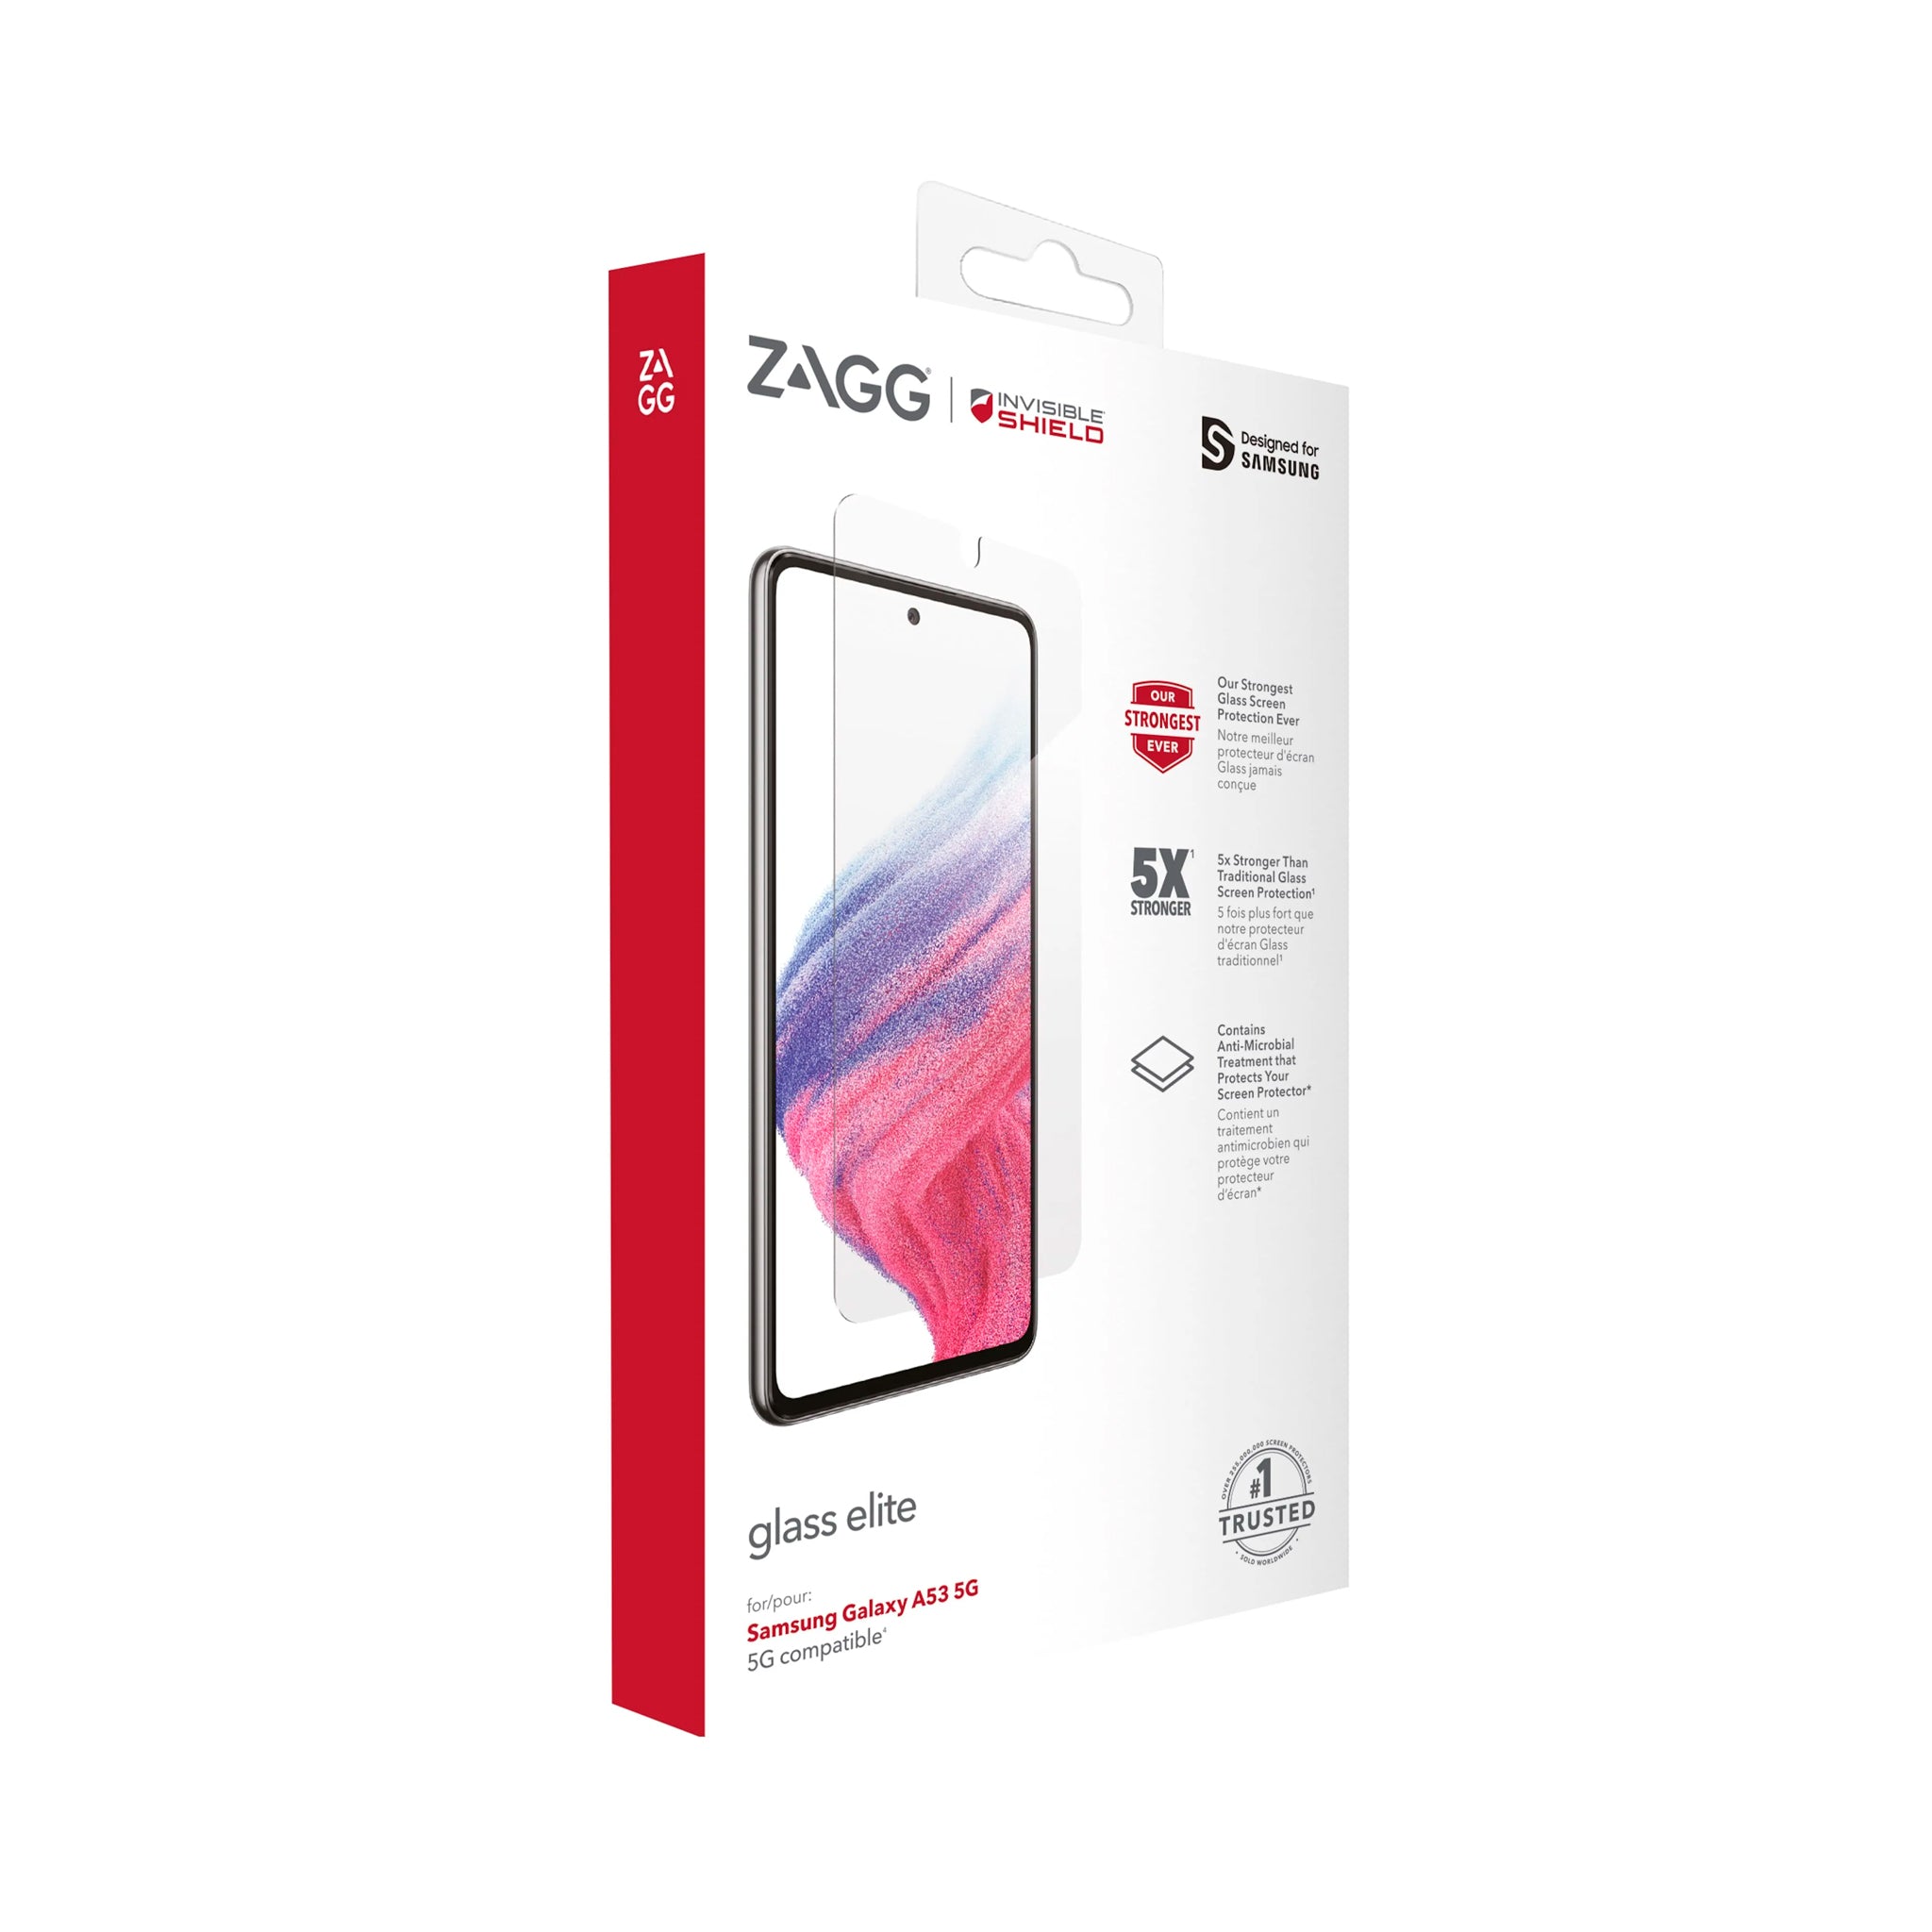 Zagg - Invisibleshield Glass Elite Antimicrobial Glass Screen Protector For Samsung Galaxy A53 5g - Clear